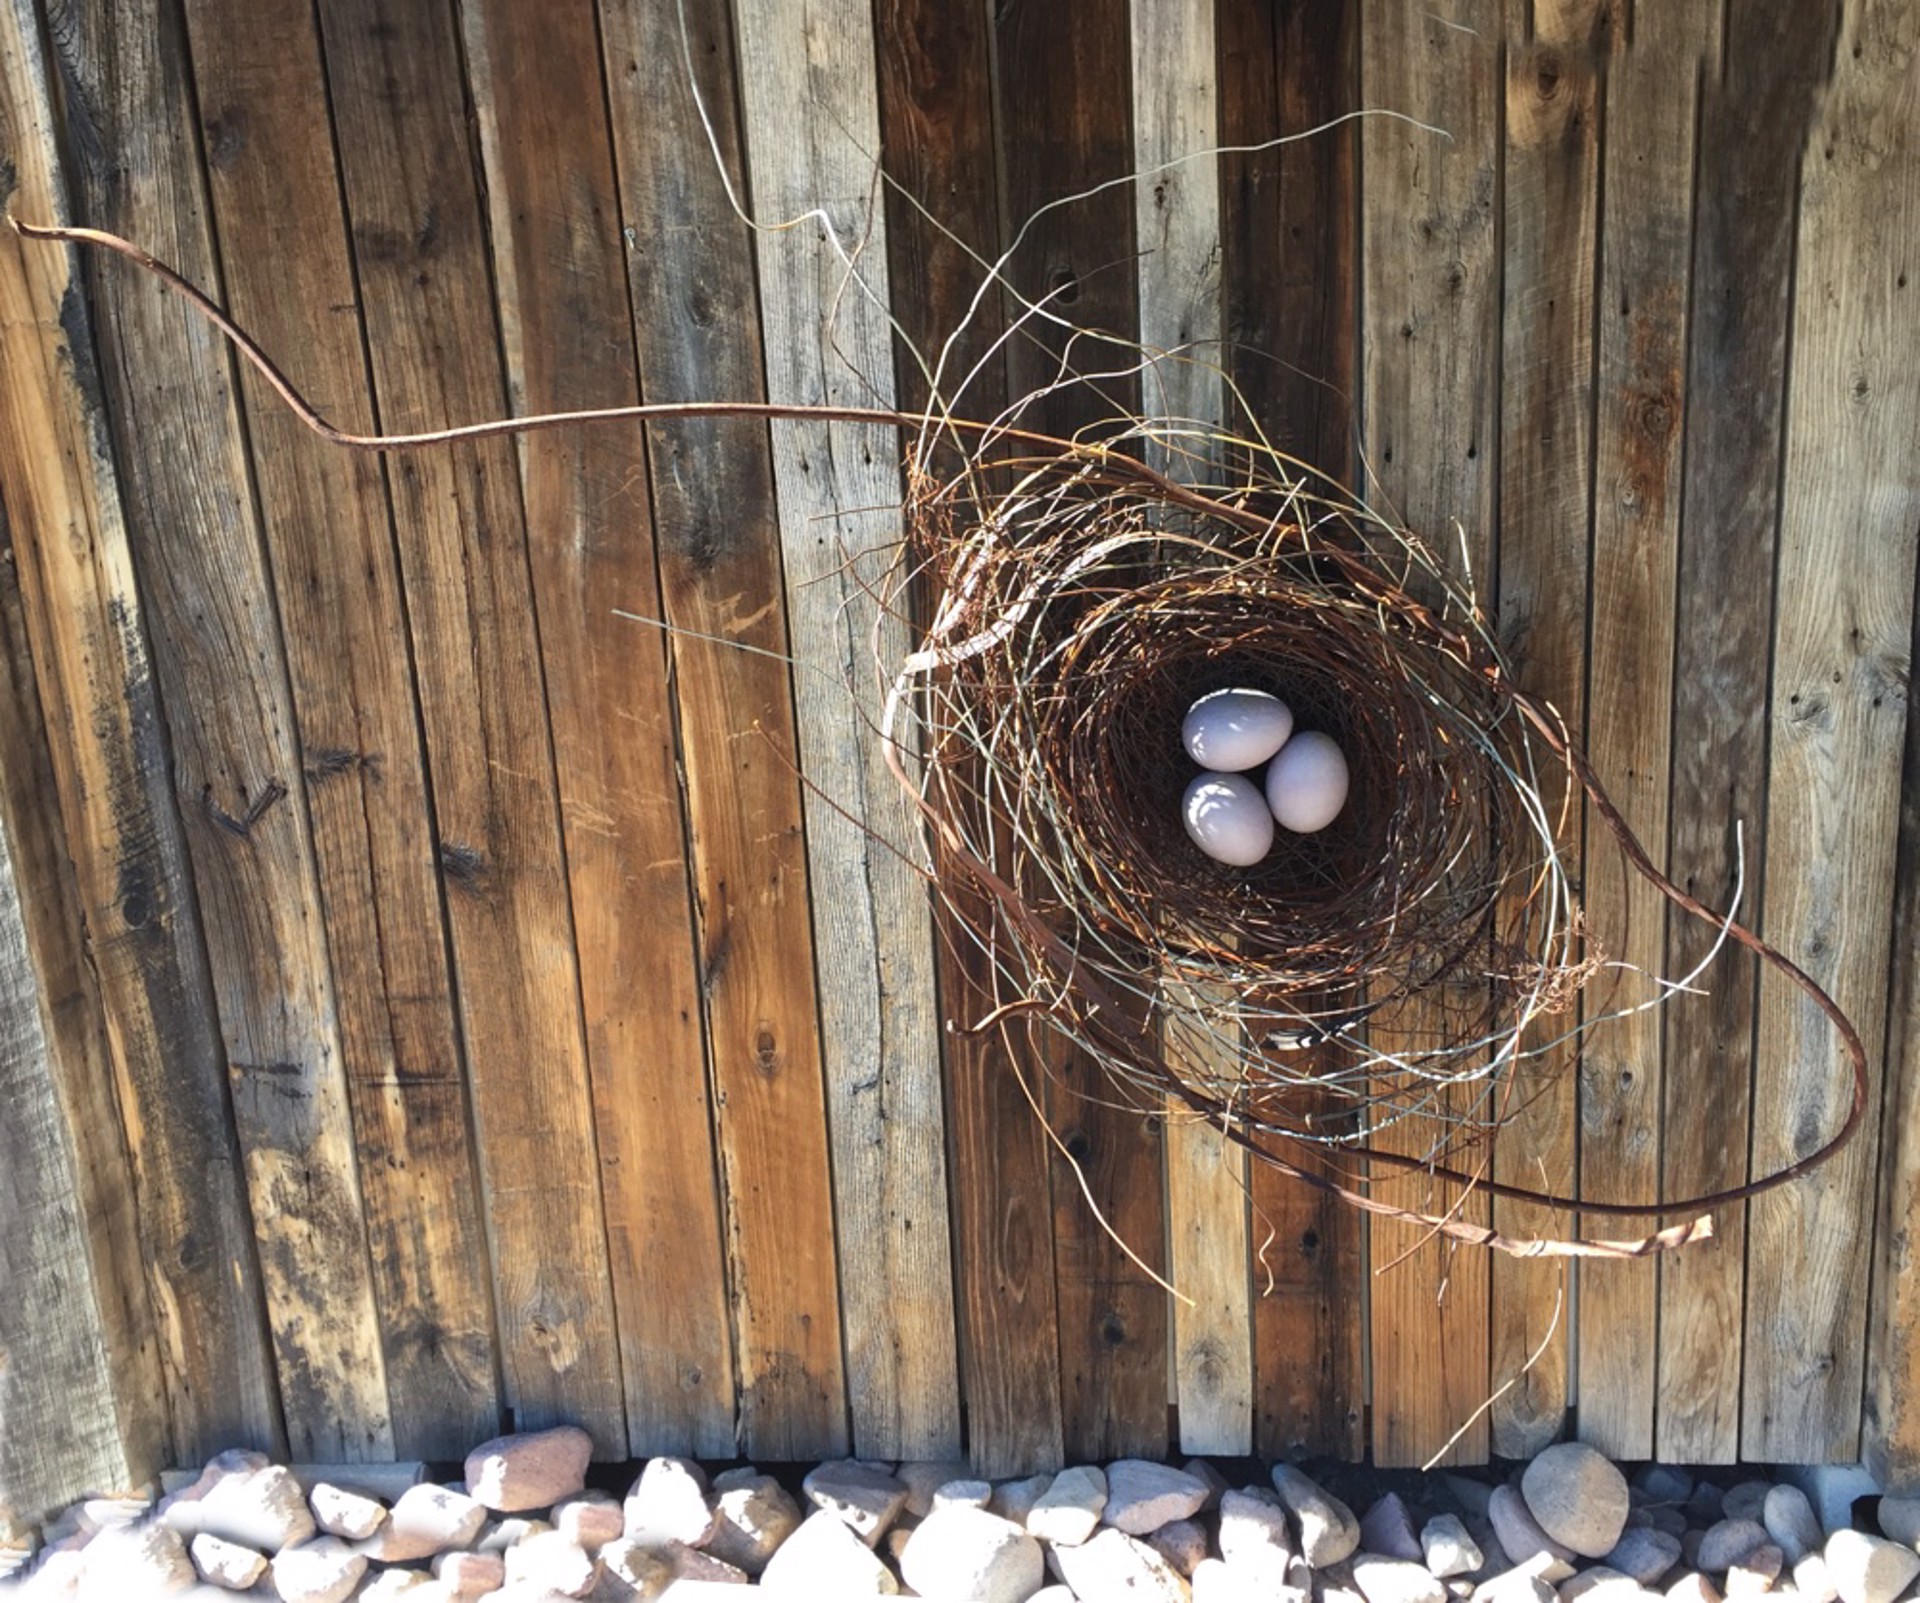 Hand Woven Wire Nest With 3 Light Lavender Ceramic Eggs - 1161 by Phil Lichtenhan